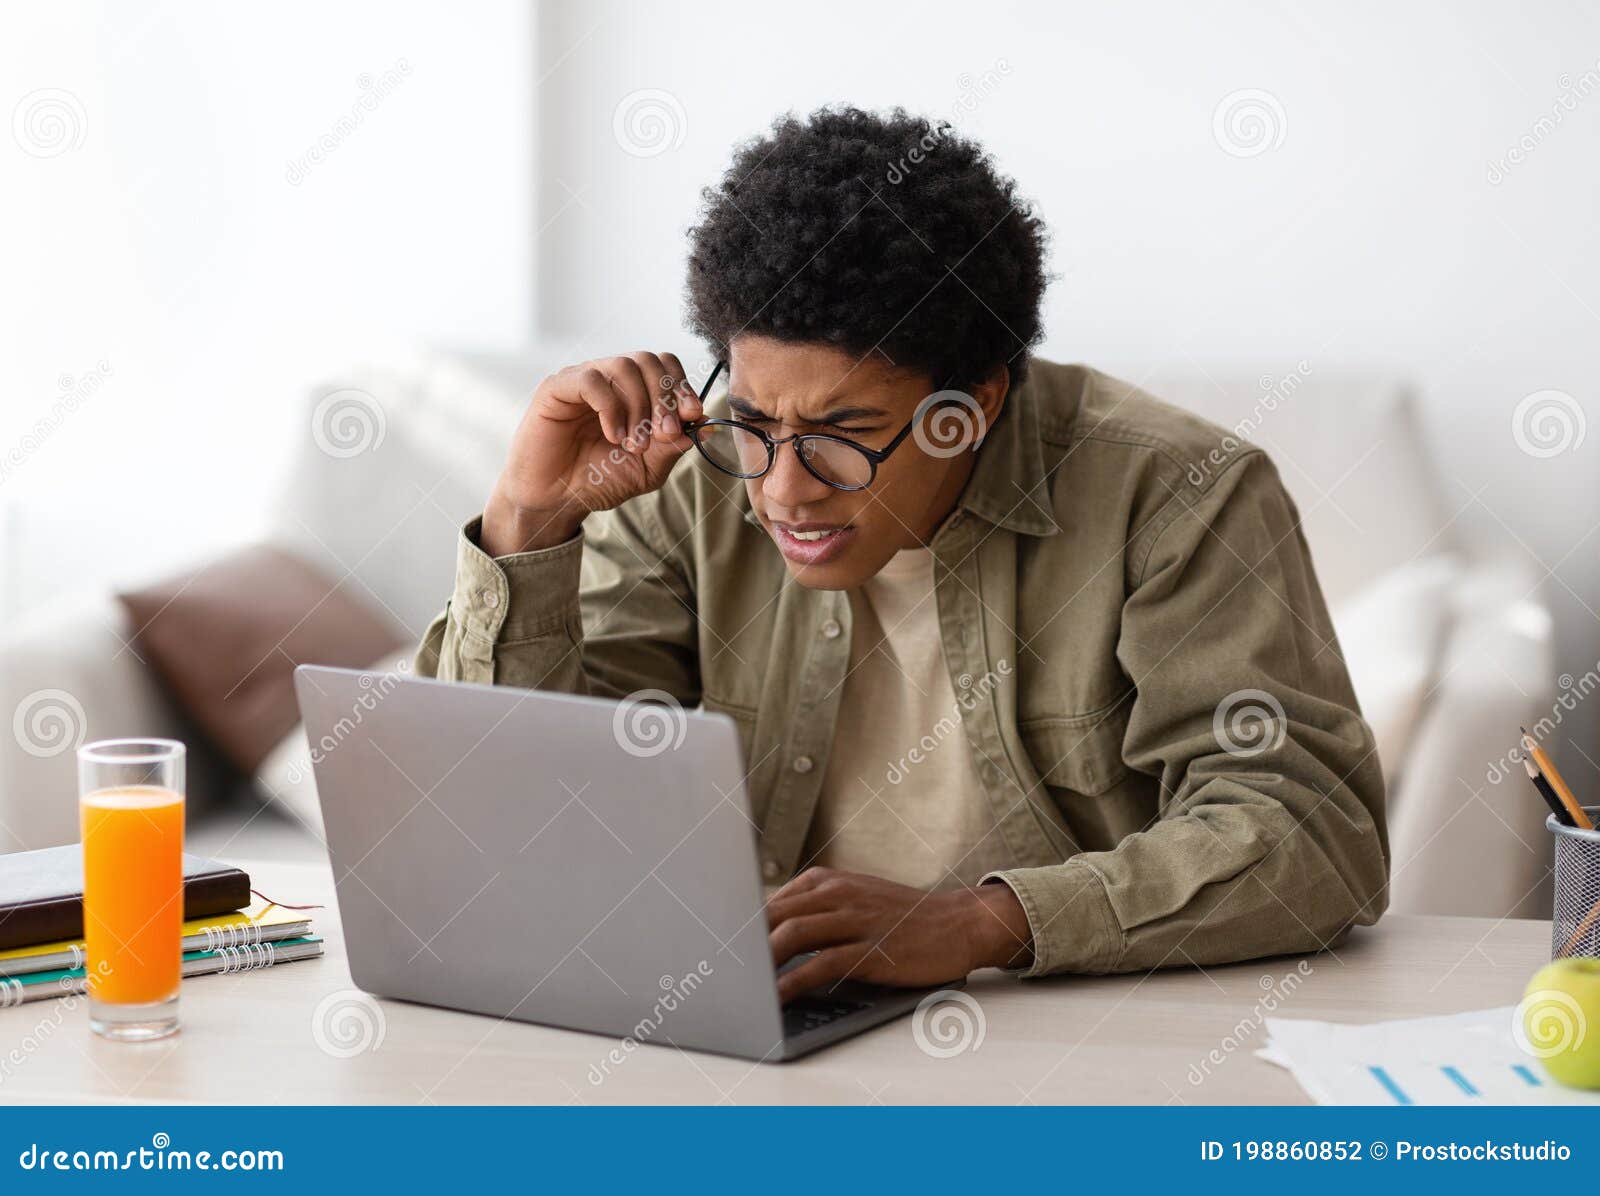 poor eyesight. black teenager in glasses squinting his eyes while using laptop computer for online education at home